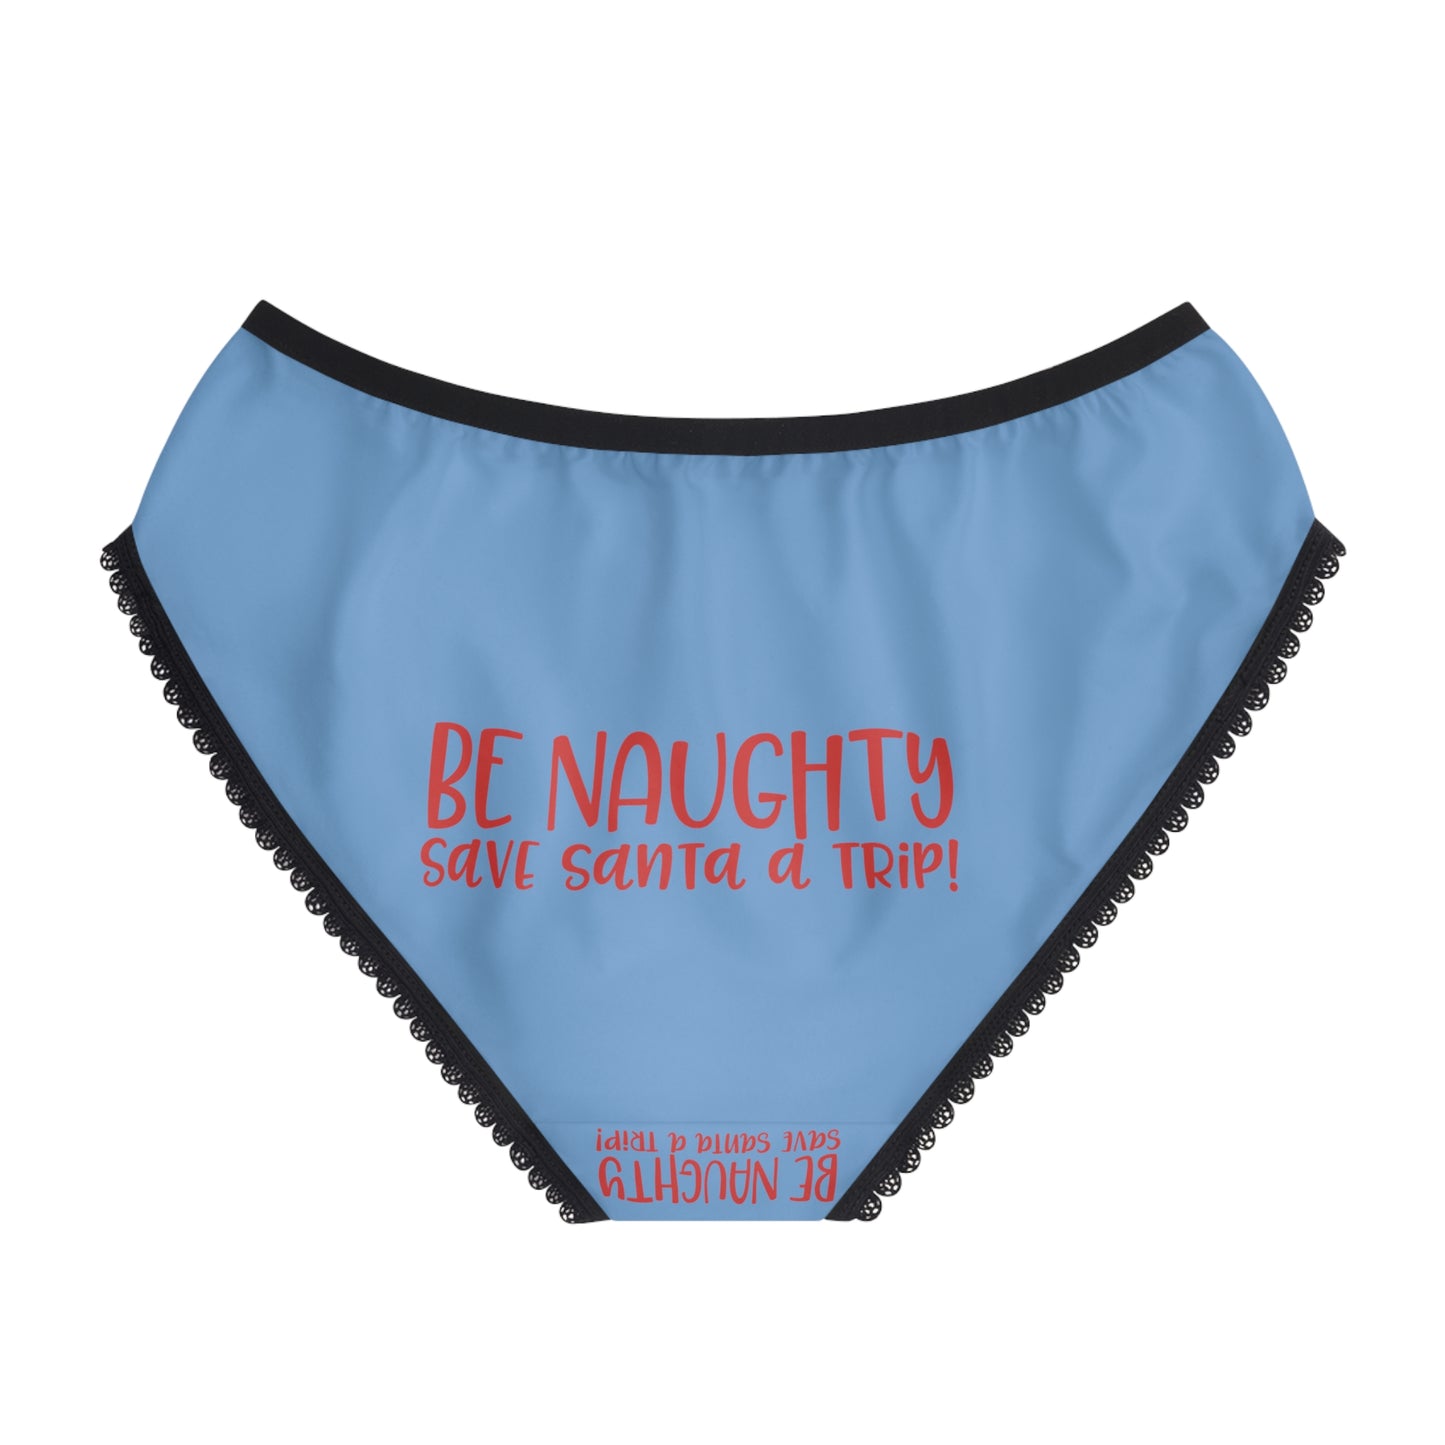 Be Naugthy Save Santa The Trip' front And Back Print Funny Women's Briefs